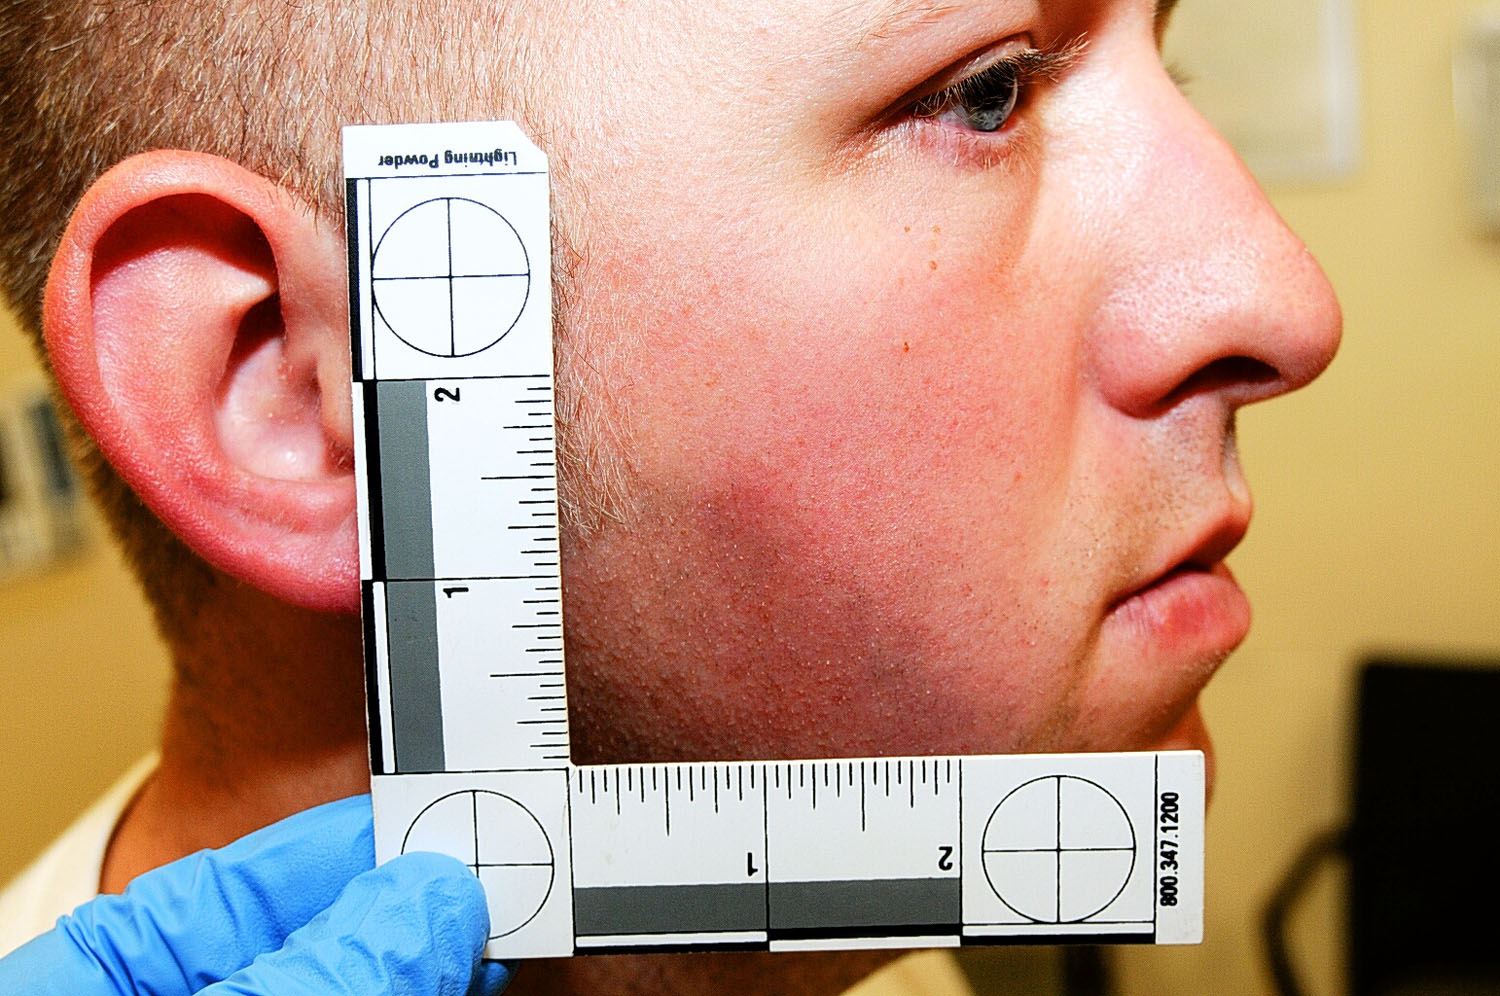 During the medical examination, bruising was discovered on Wilson's cheek where he says Brown punched him in the face